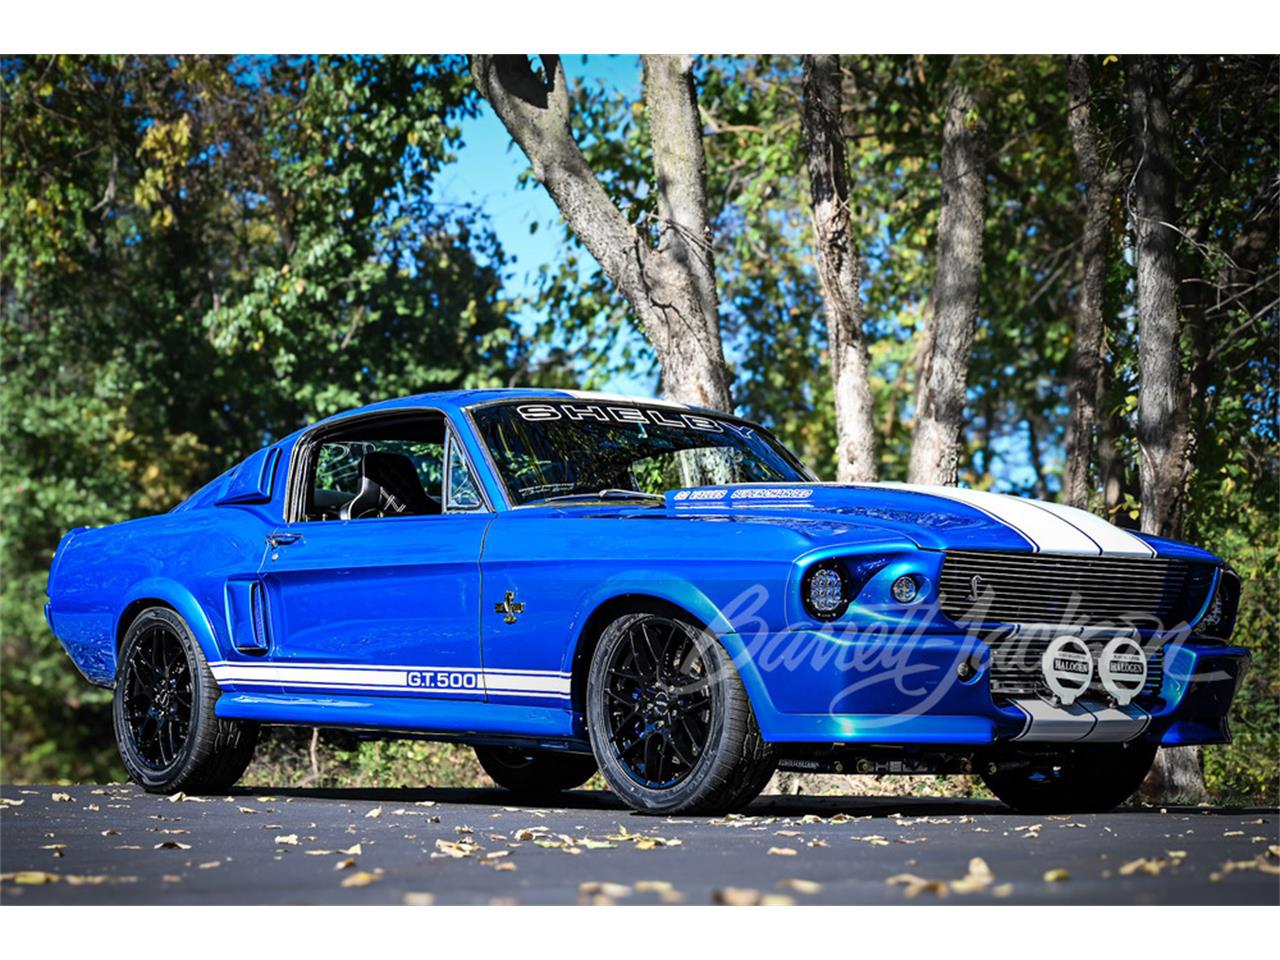 For Sale at Auction: 1967 Ford Mustang in Scottsdale, Arizona for sale in Scottsdale, AZ